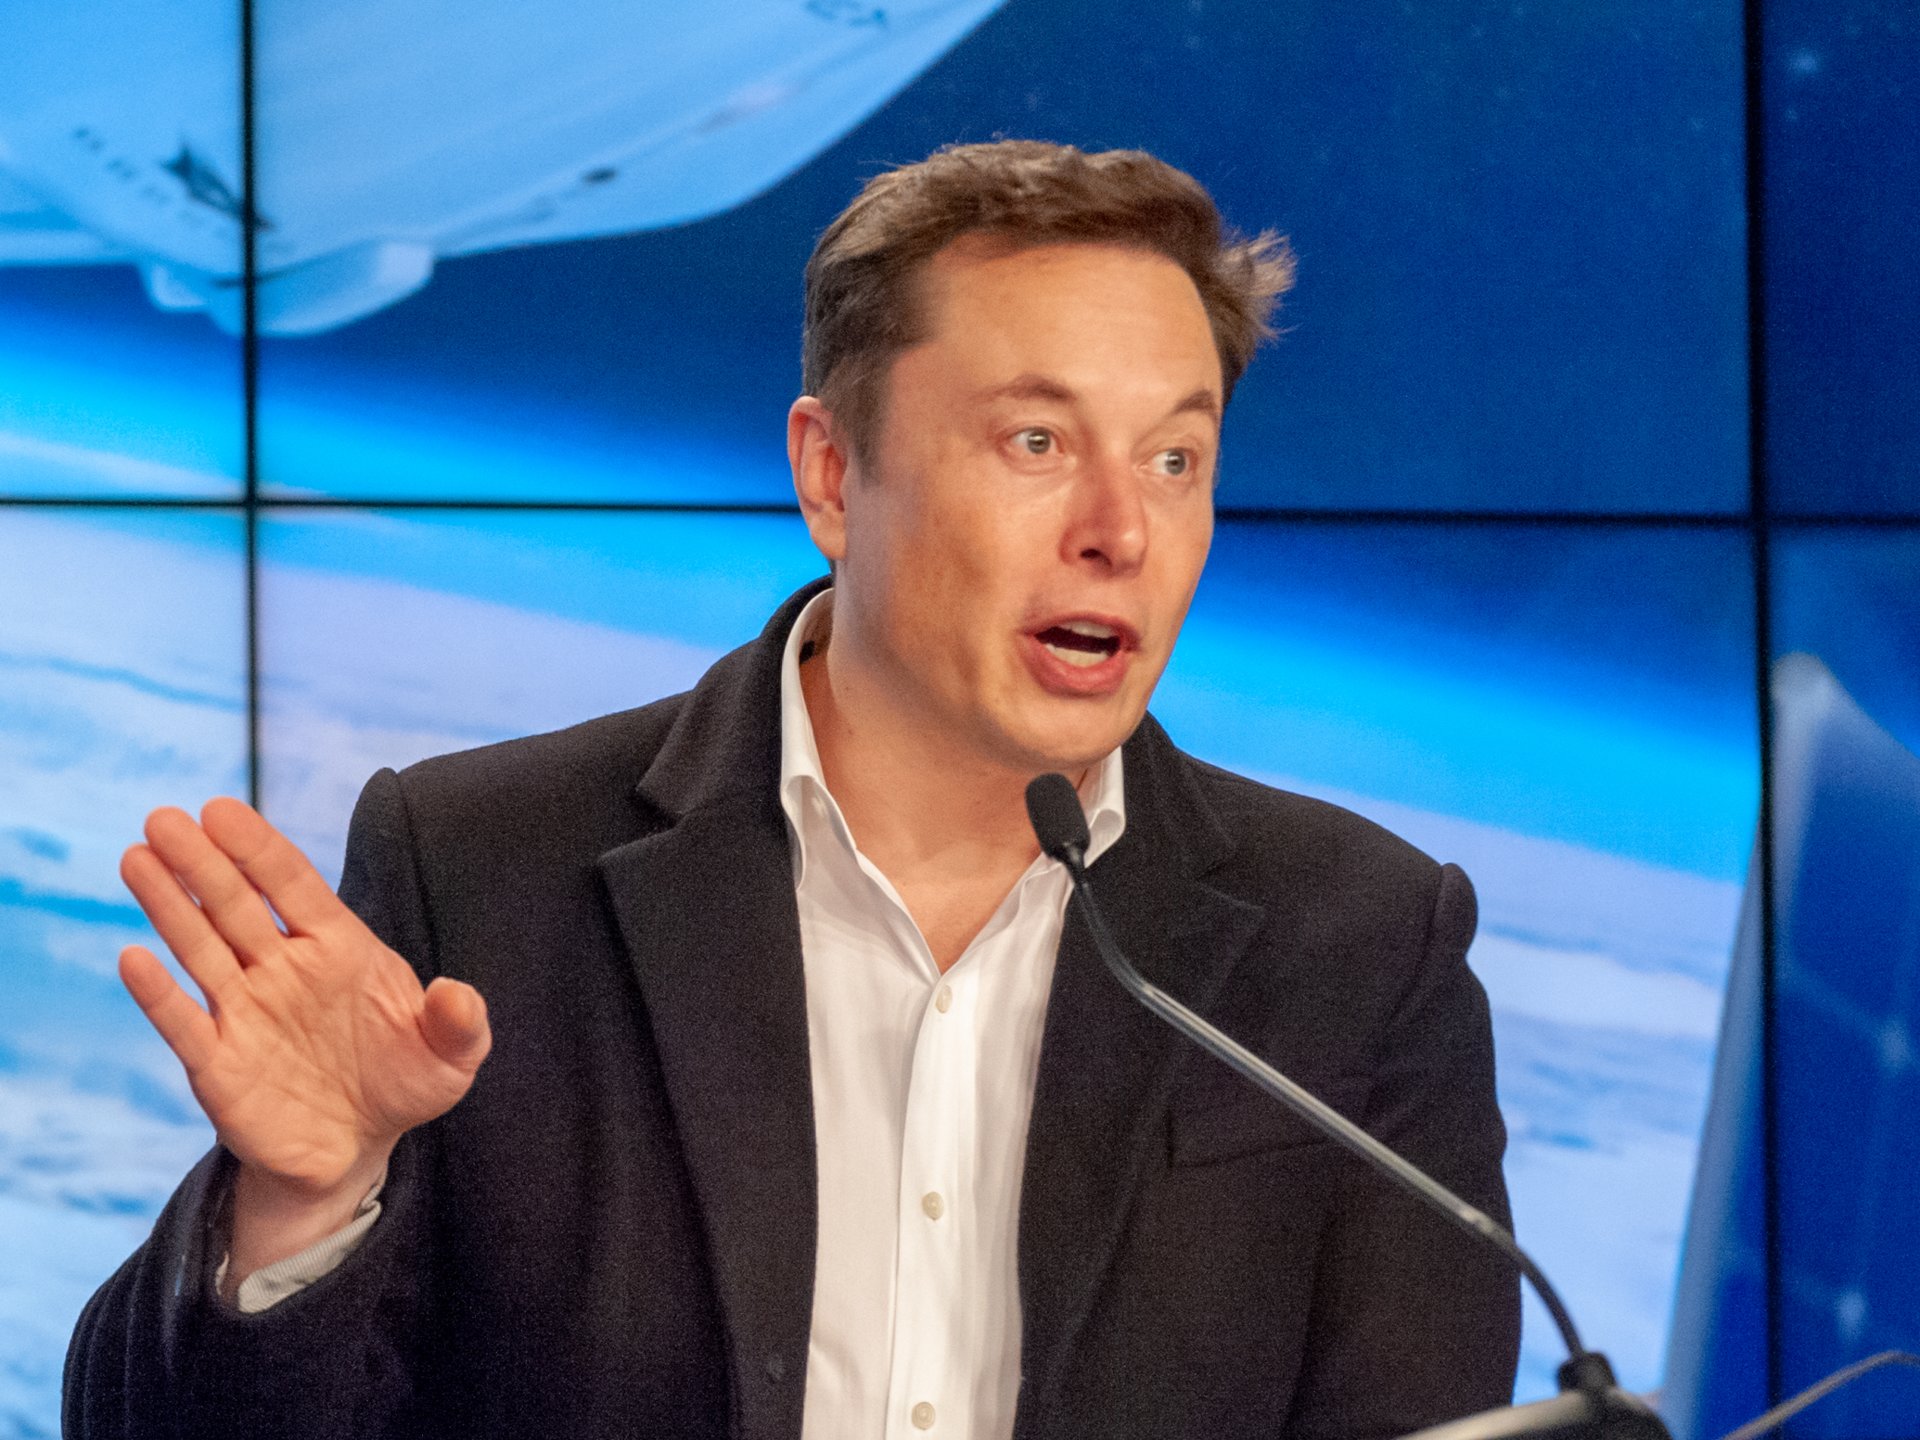 Elon Musk would like to fly on the Dragon. And yet, to build a moon base with NASA